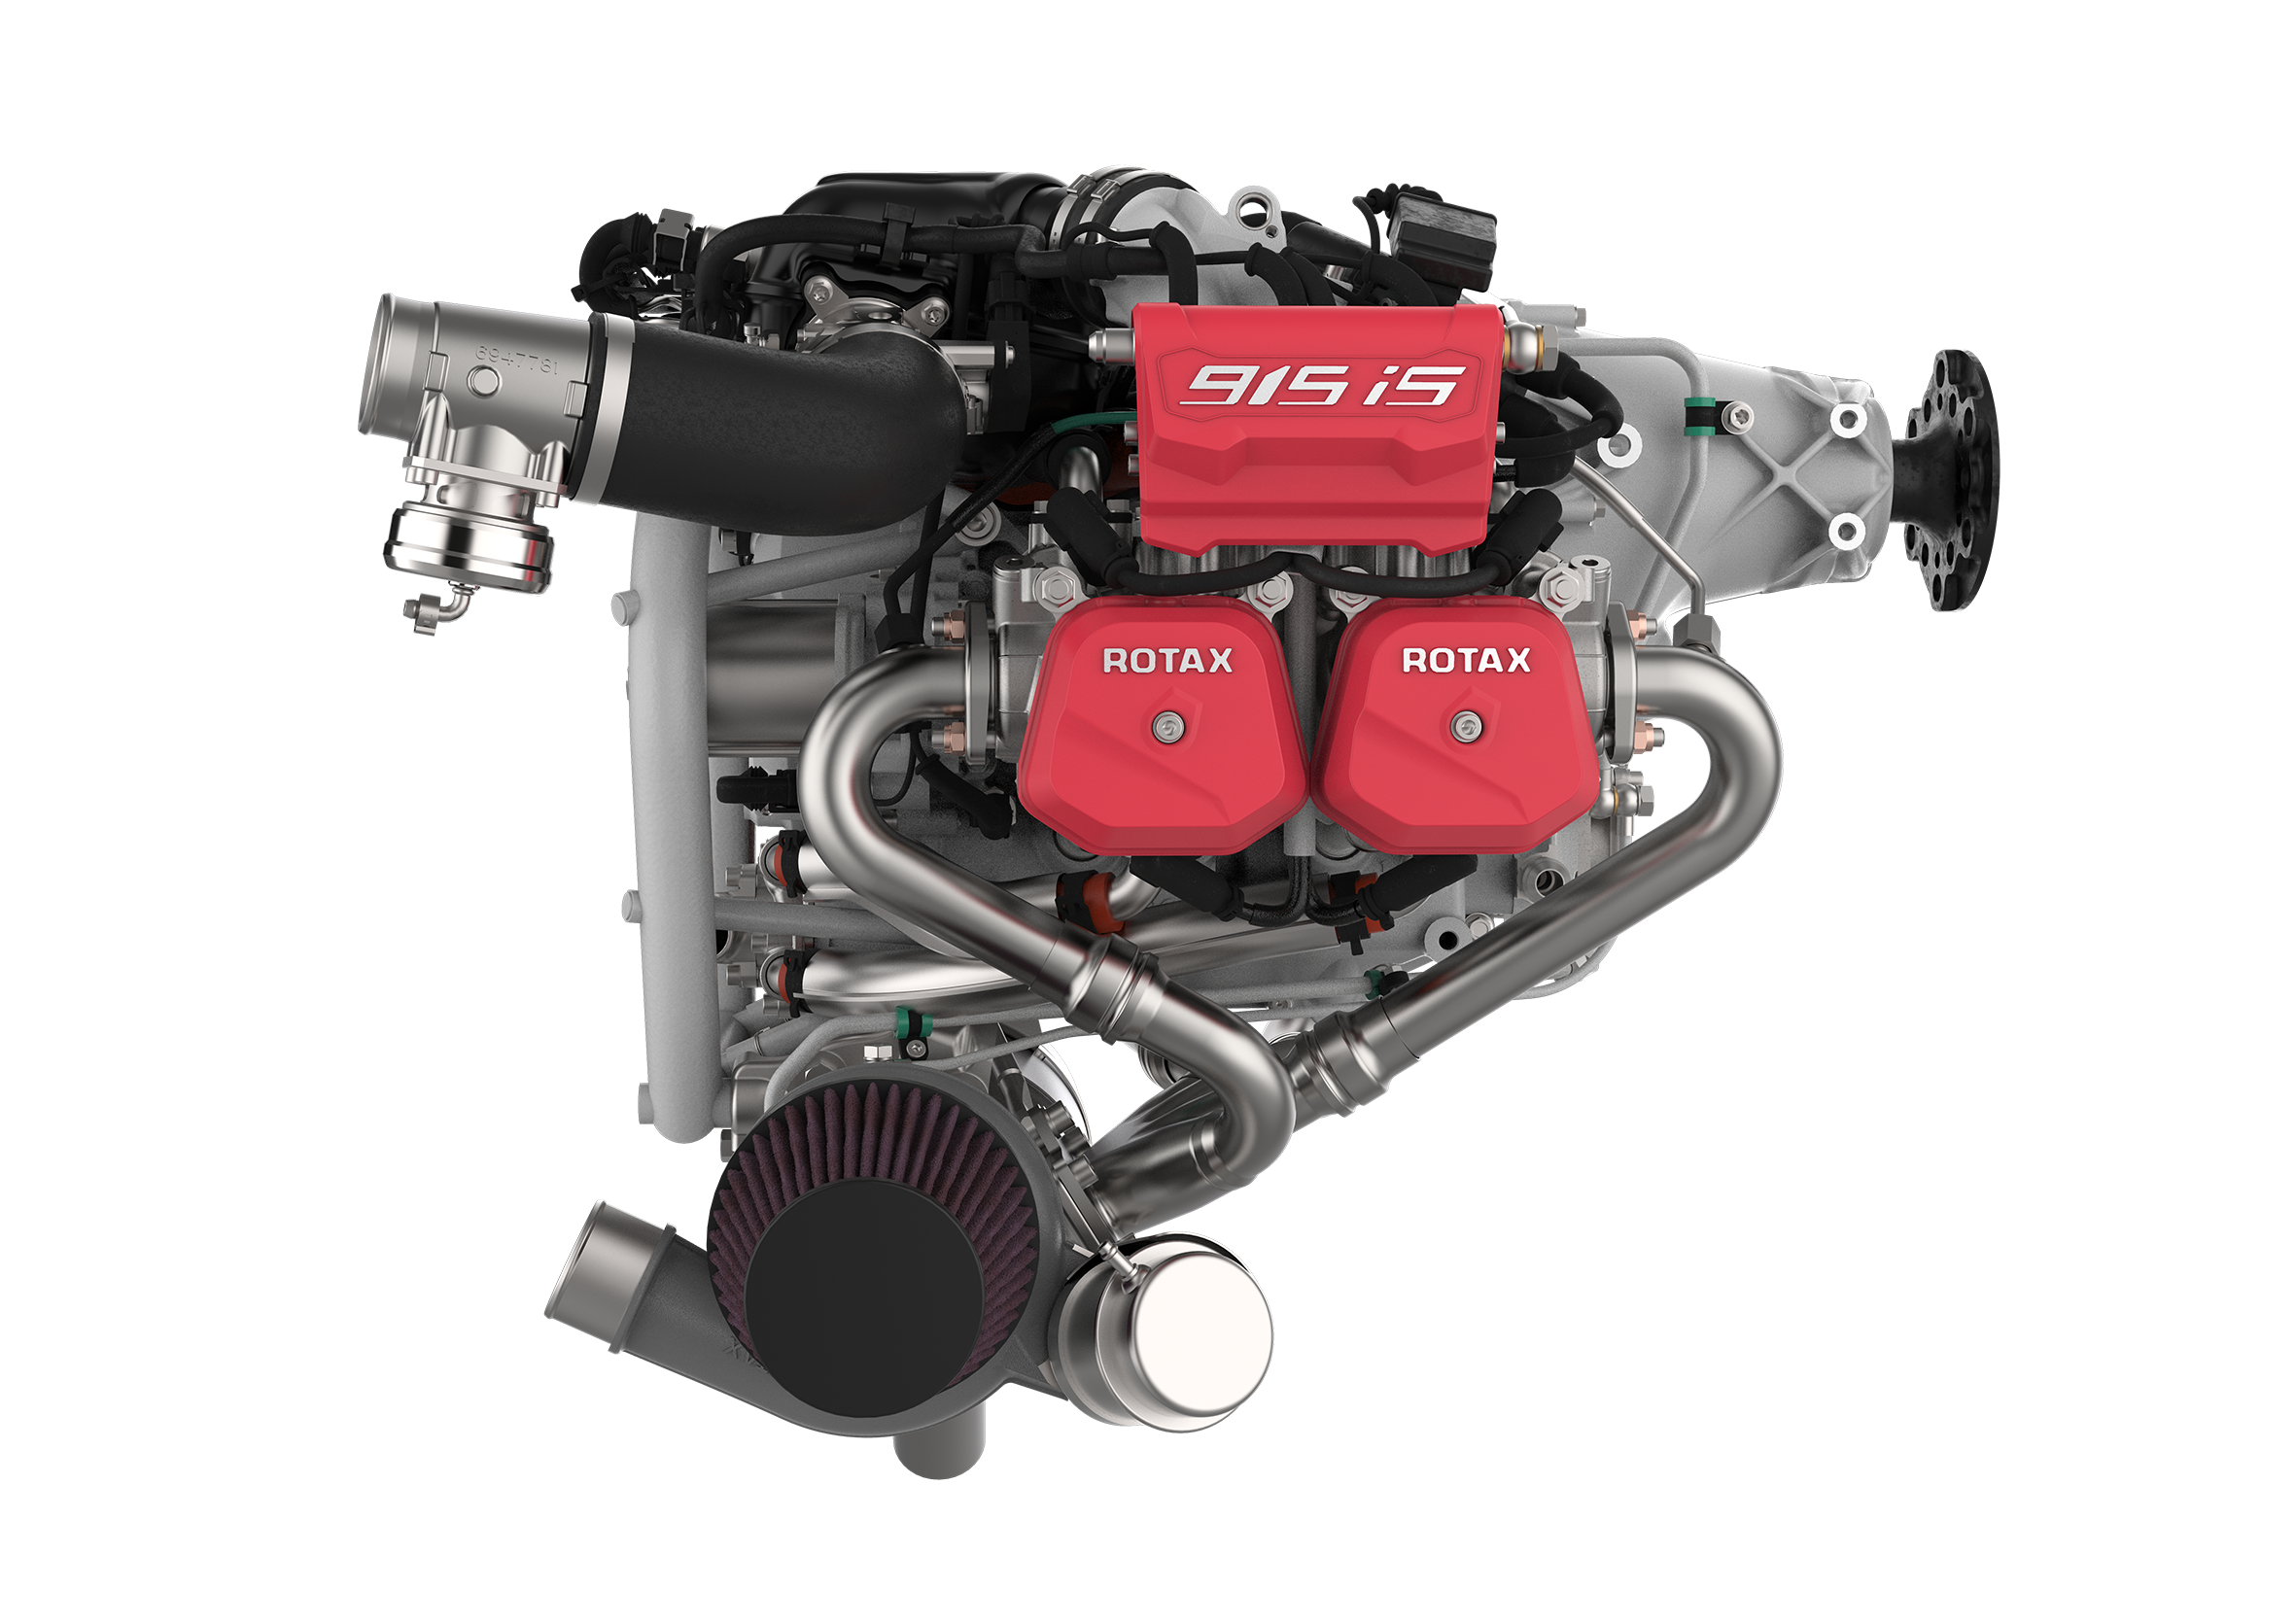 Rotax aircraft engine 915i S limited edition 5